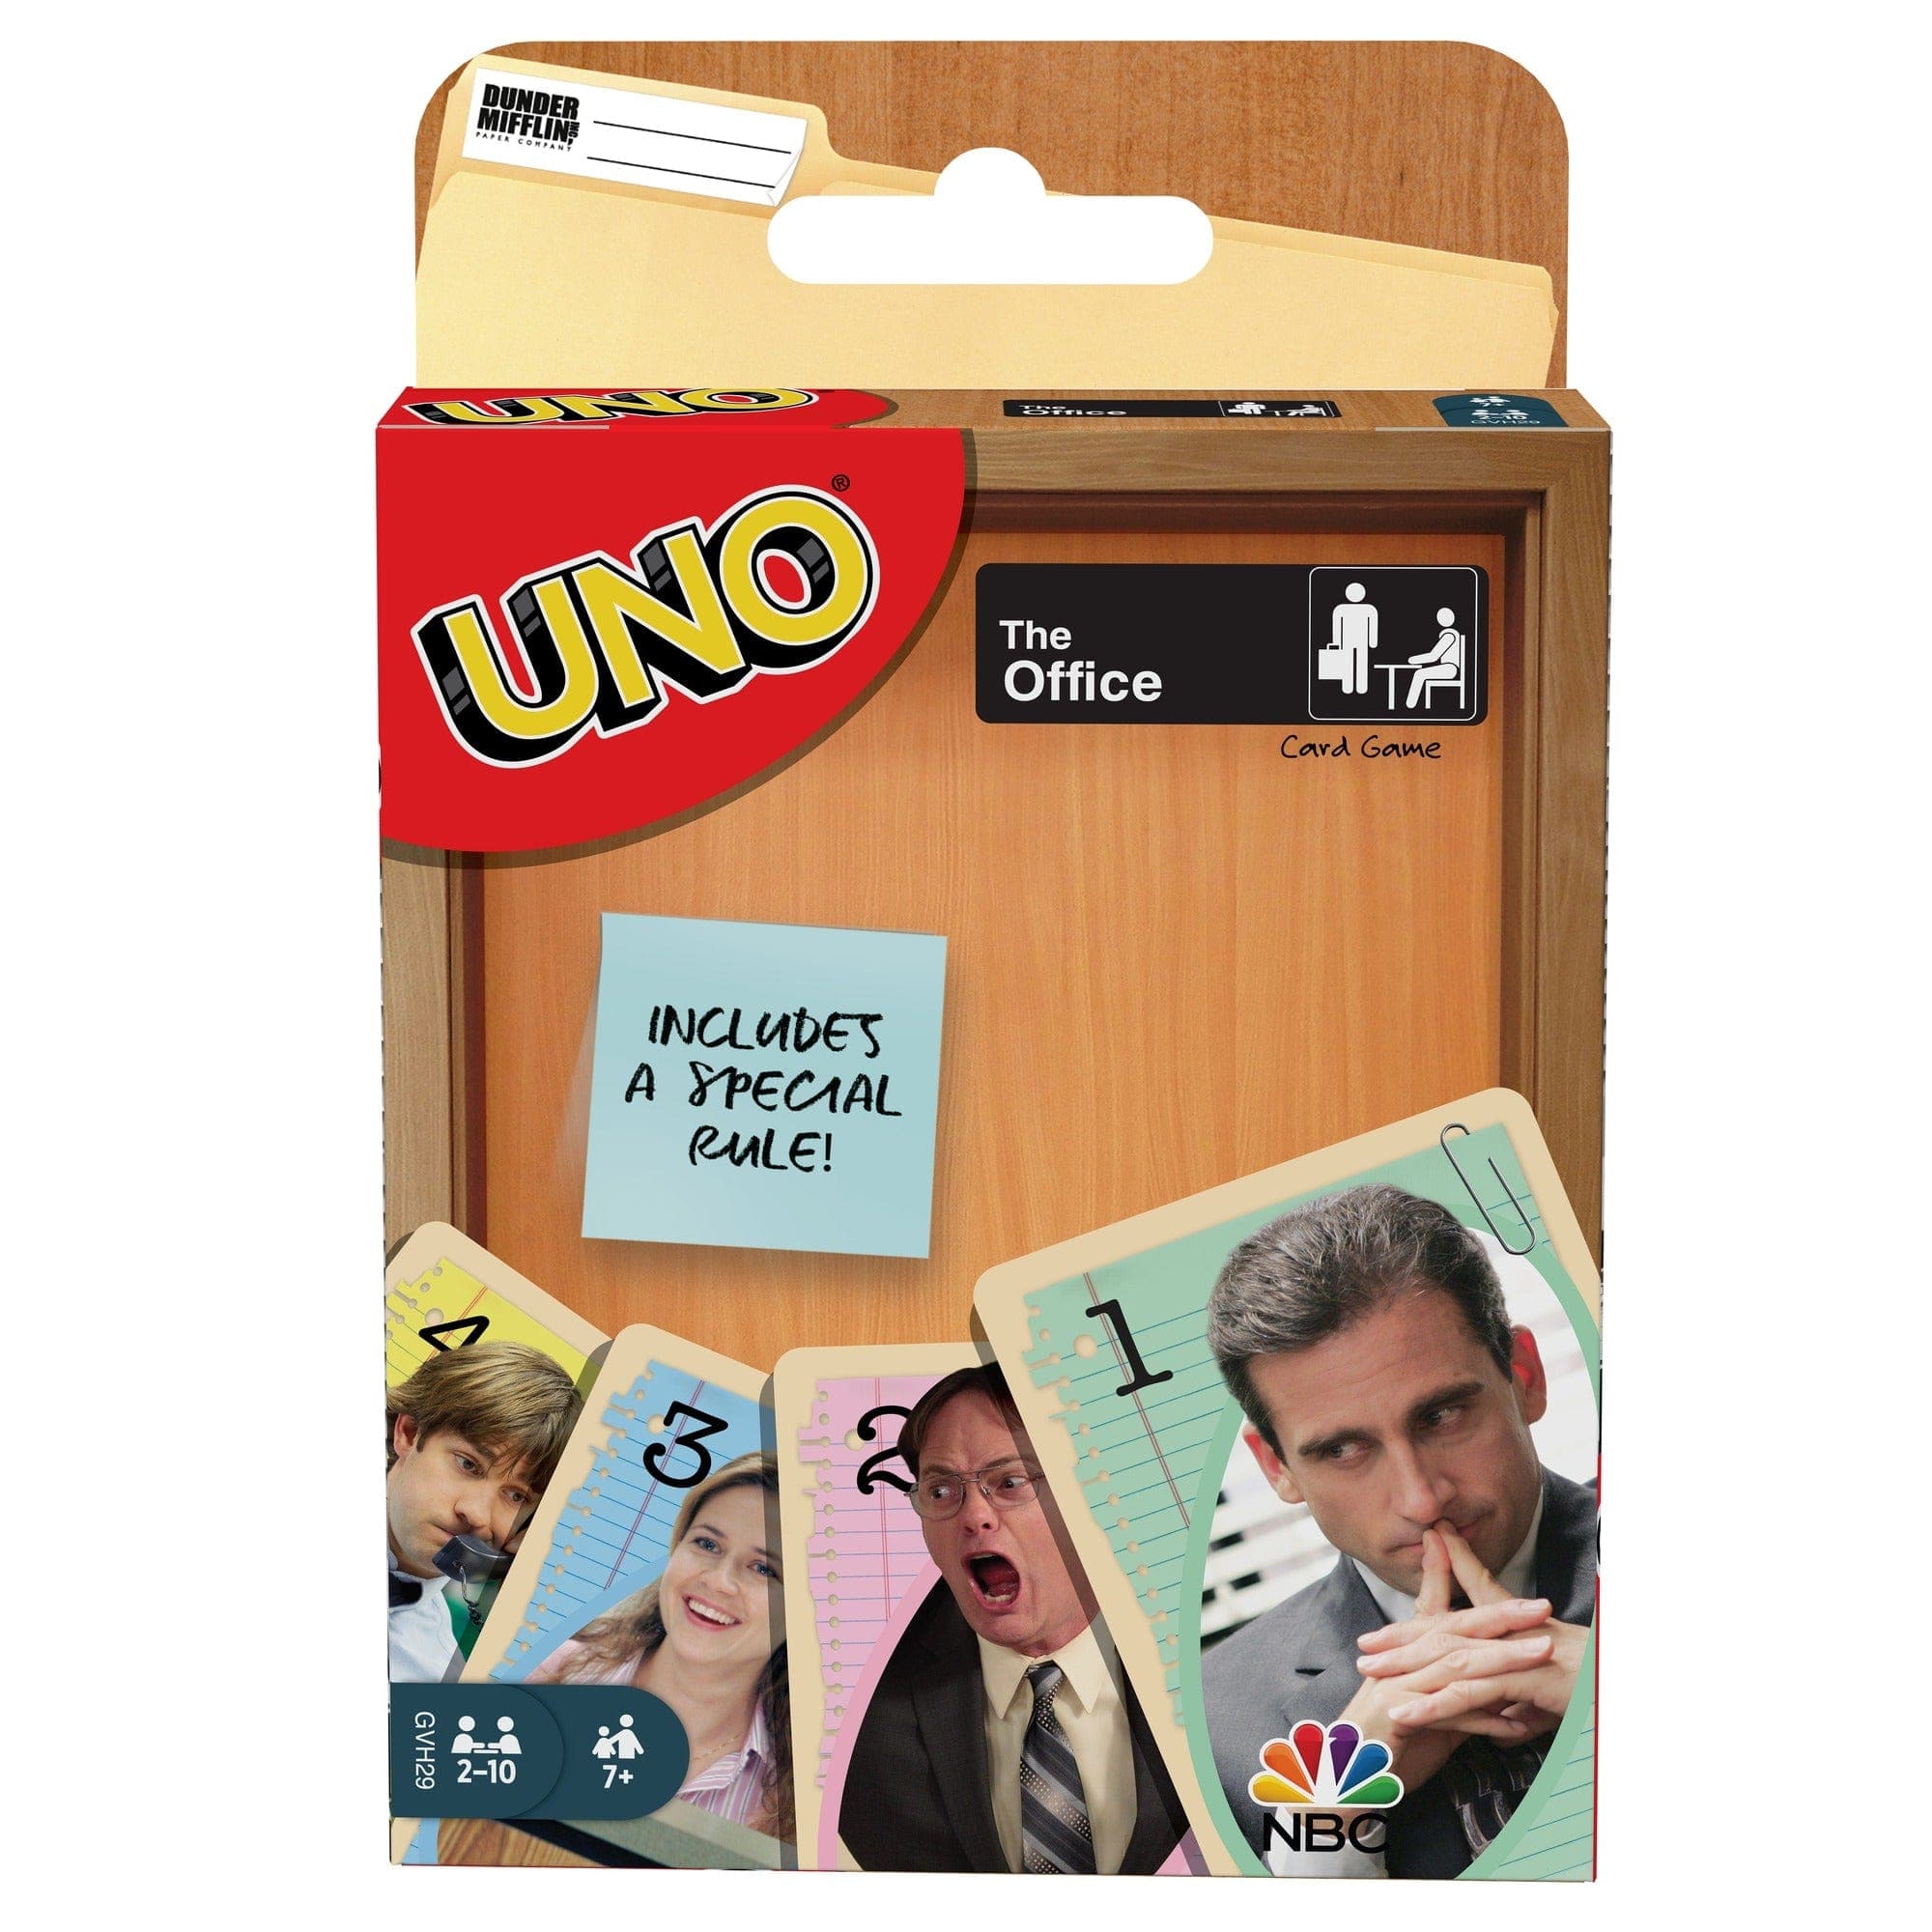 Mattel-UNO Card Game - The Office Edition-GVH29-Legacy Toys